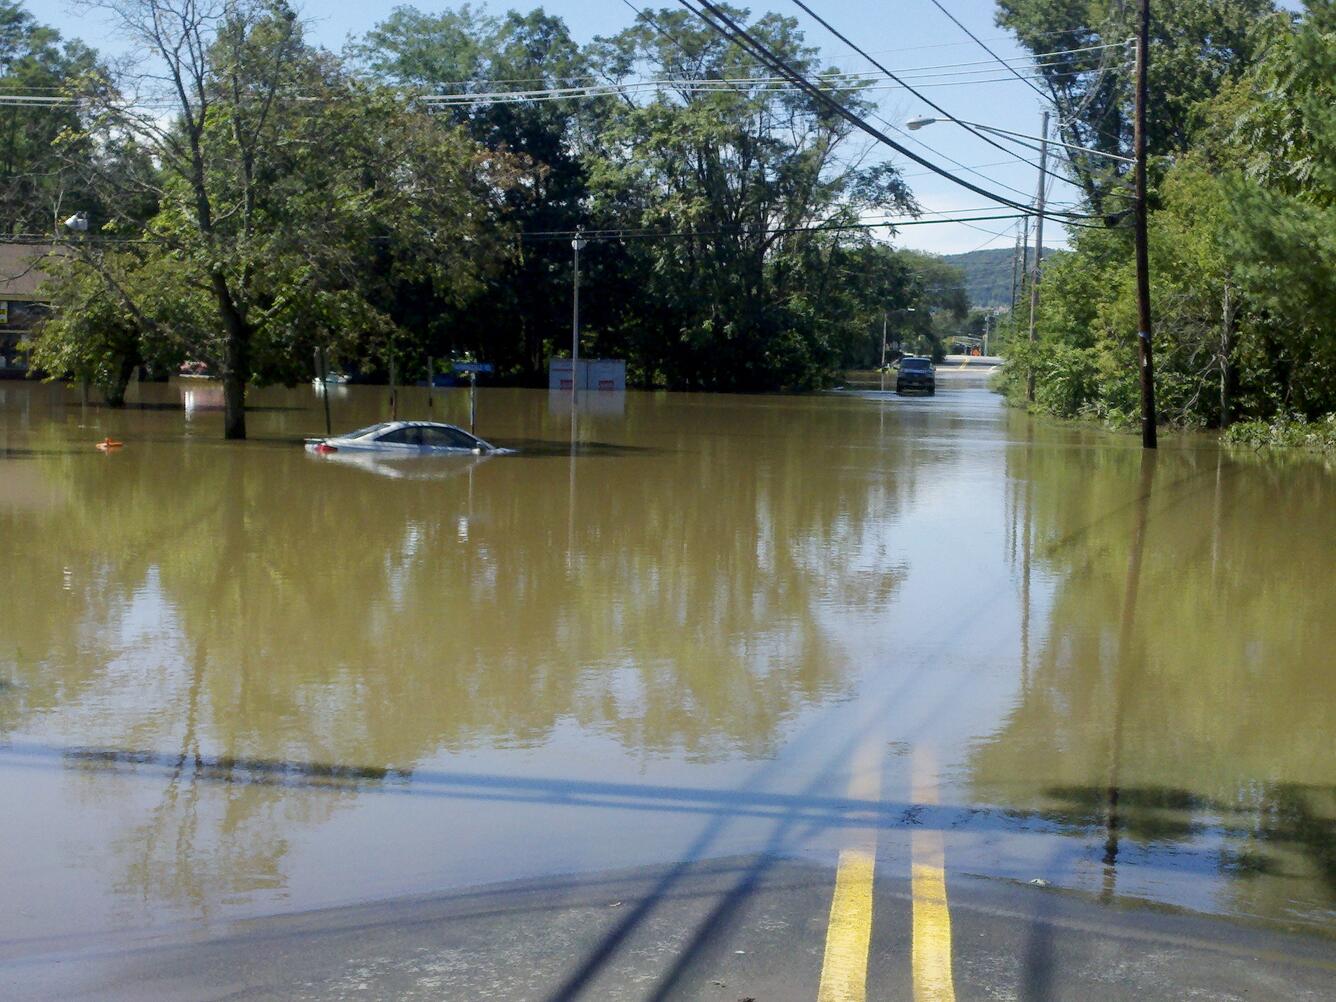 Car submerged in floodwaters